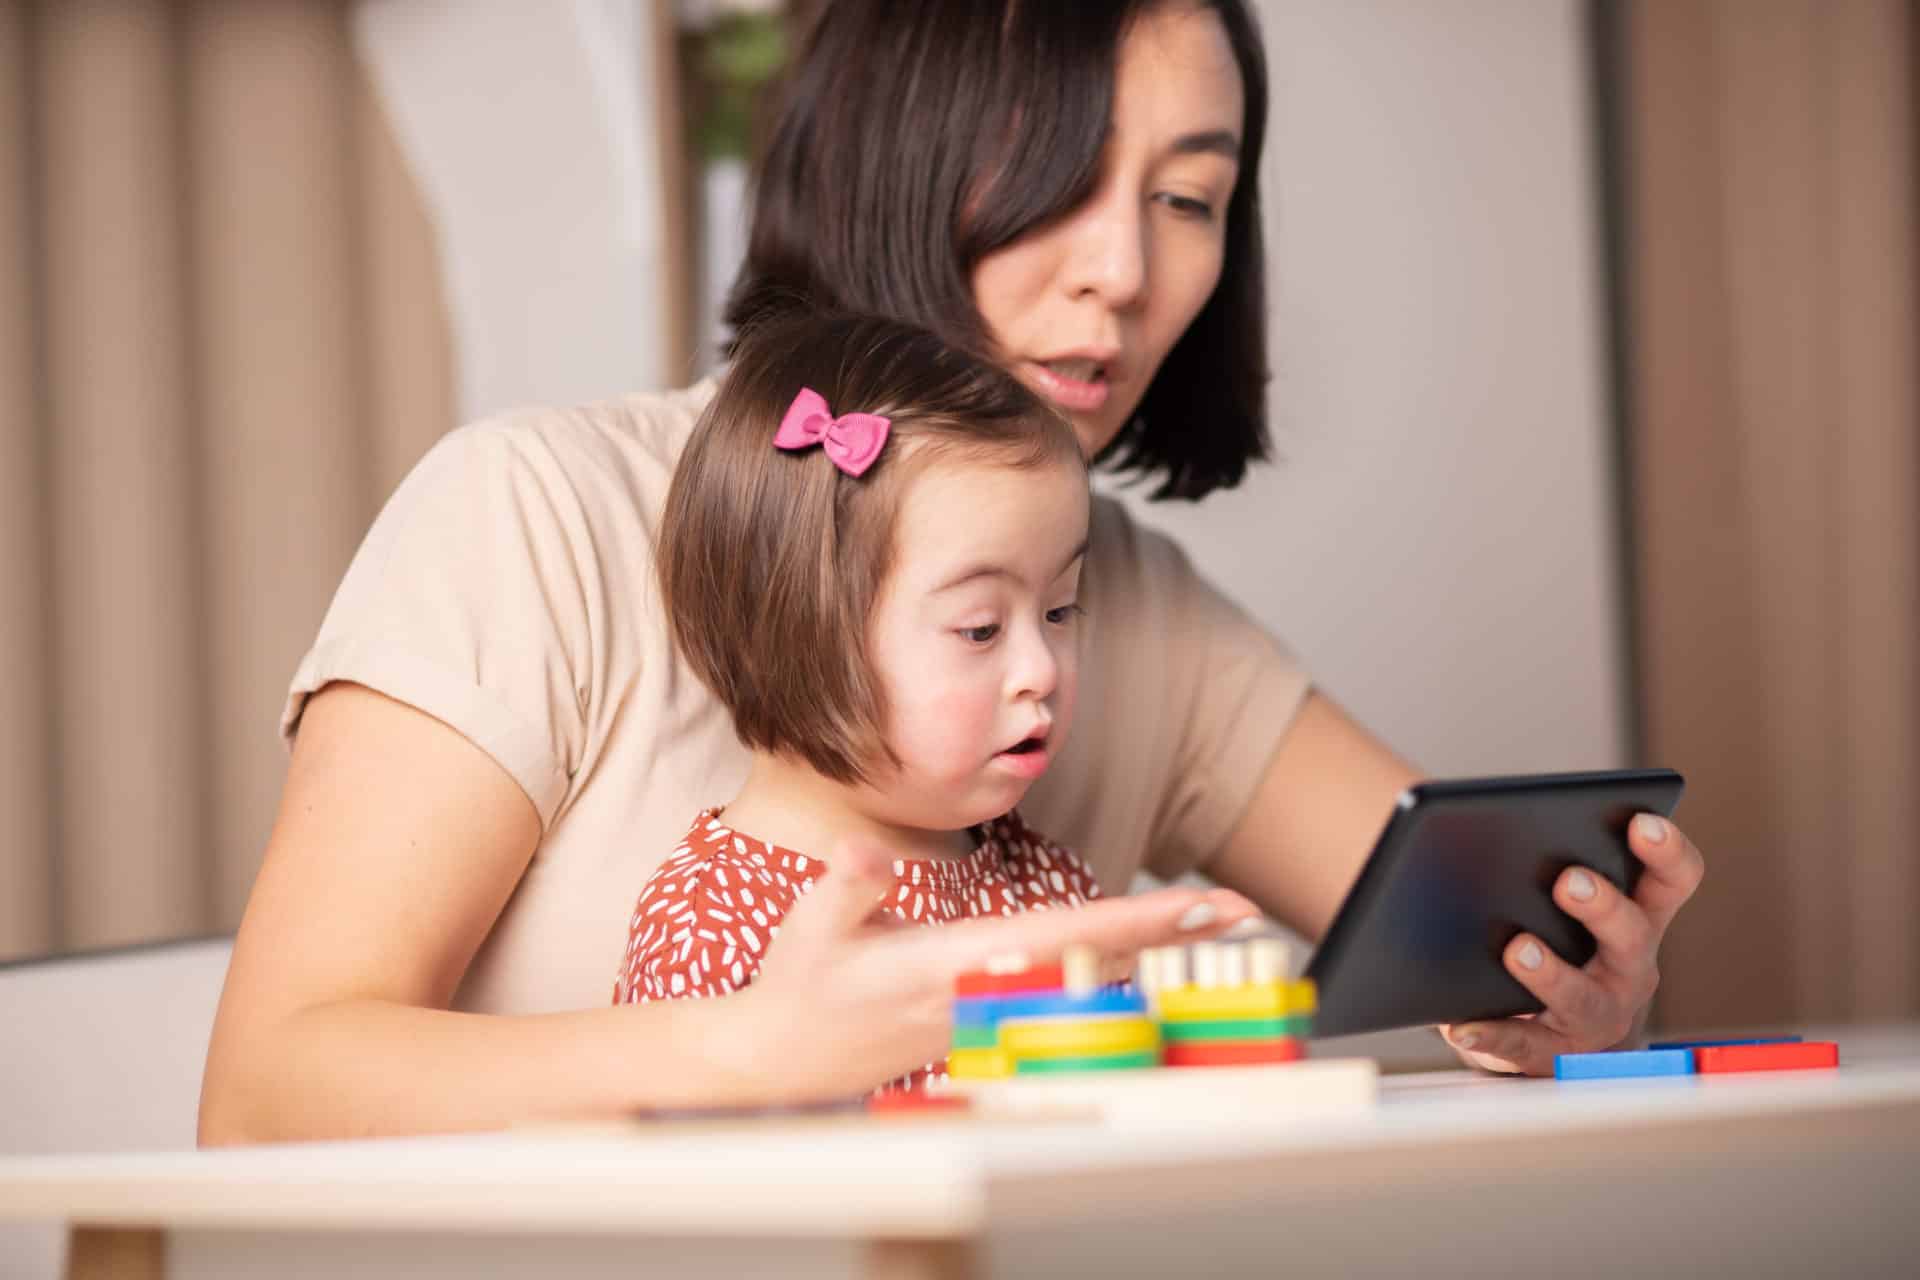 A woman holding an iPad for her young child.  They are both looking at the iPad.